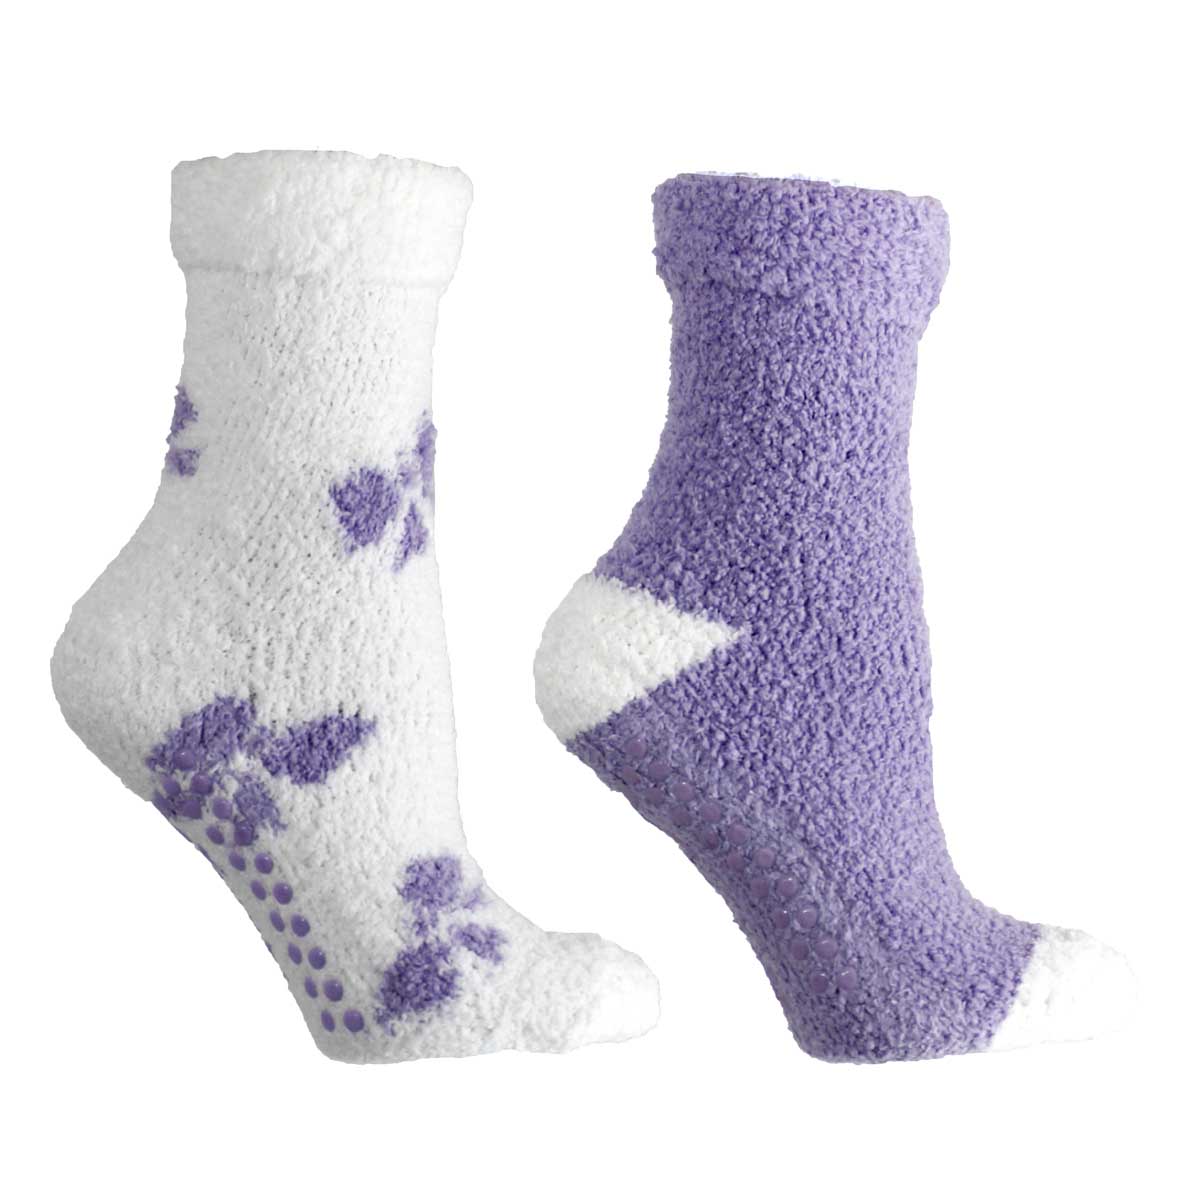 2 Pair Pack Women's Chenille Slipper Socks Lavender Infused Non-slip Fuzzy and Warm Bows Lavender Kissables By MinxNY